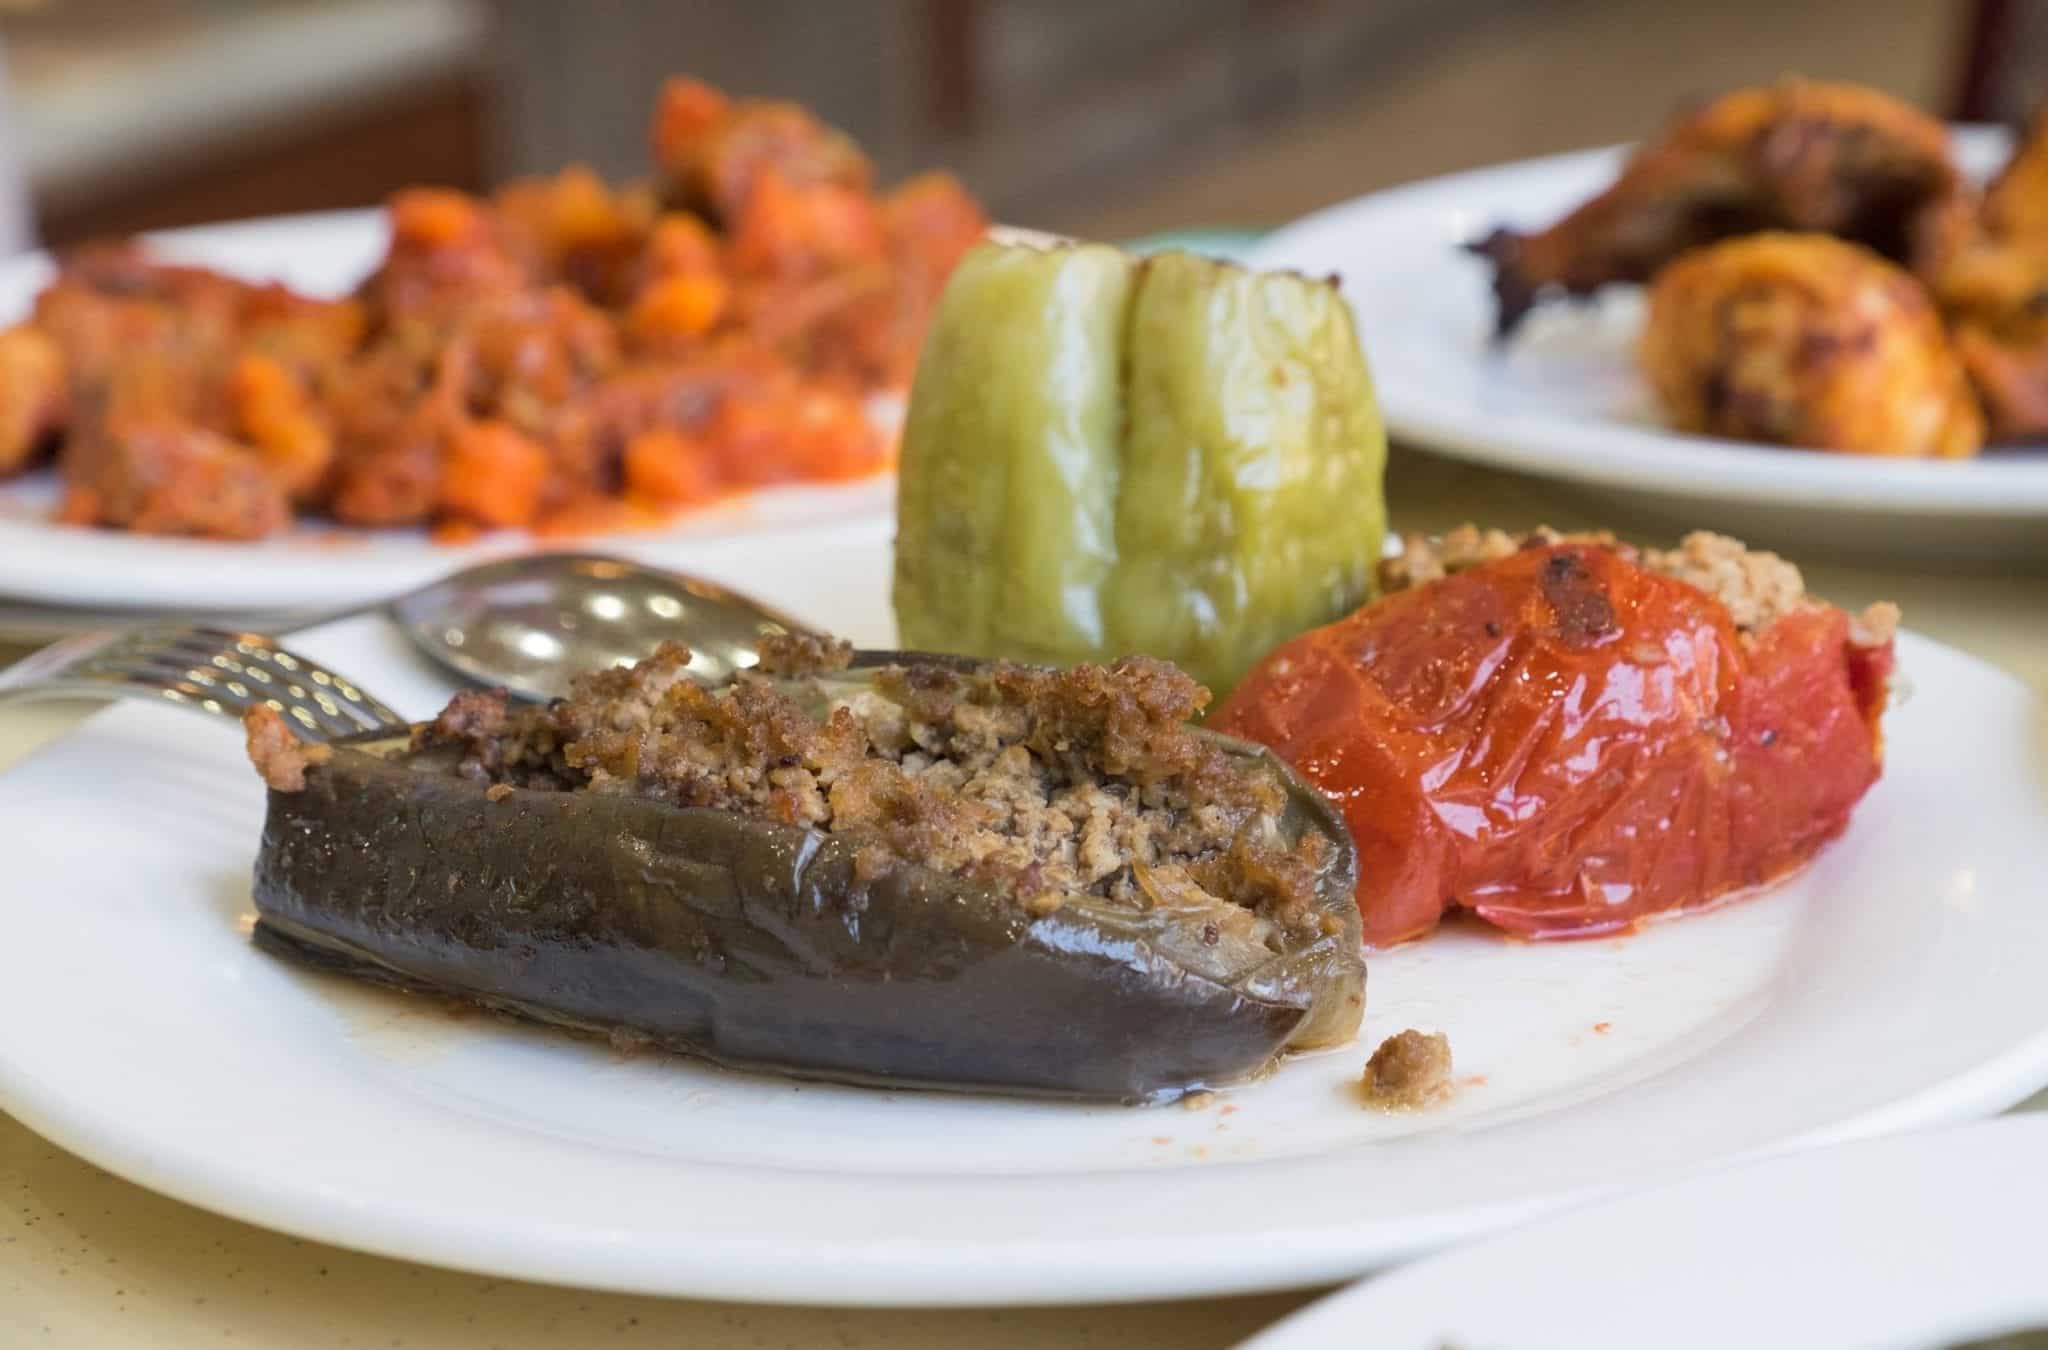 On a plate, an eggplant and two kinds of peppers stuffed with minced beef.